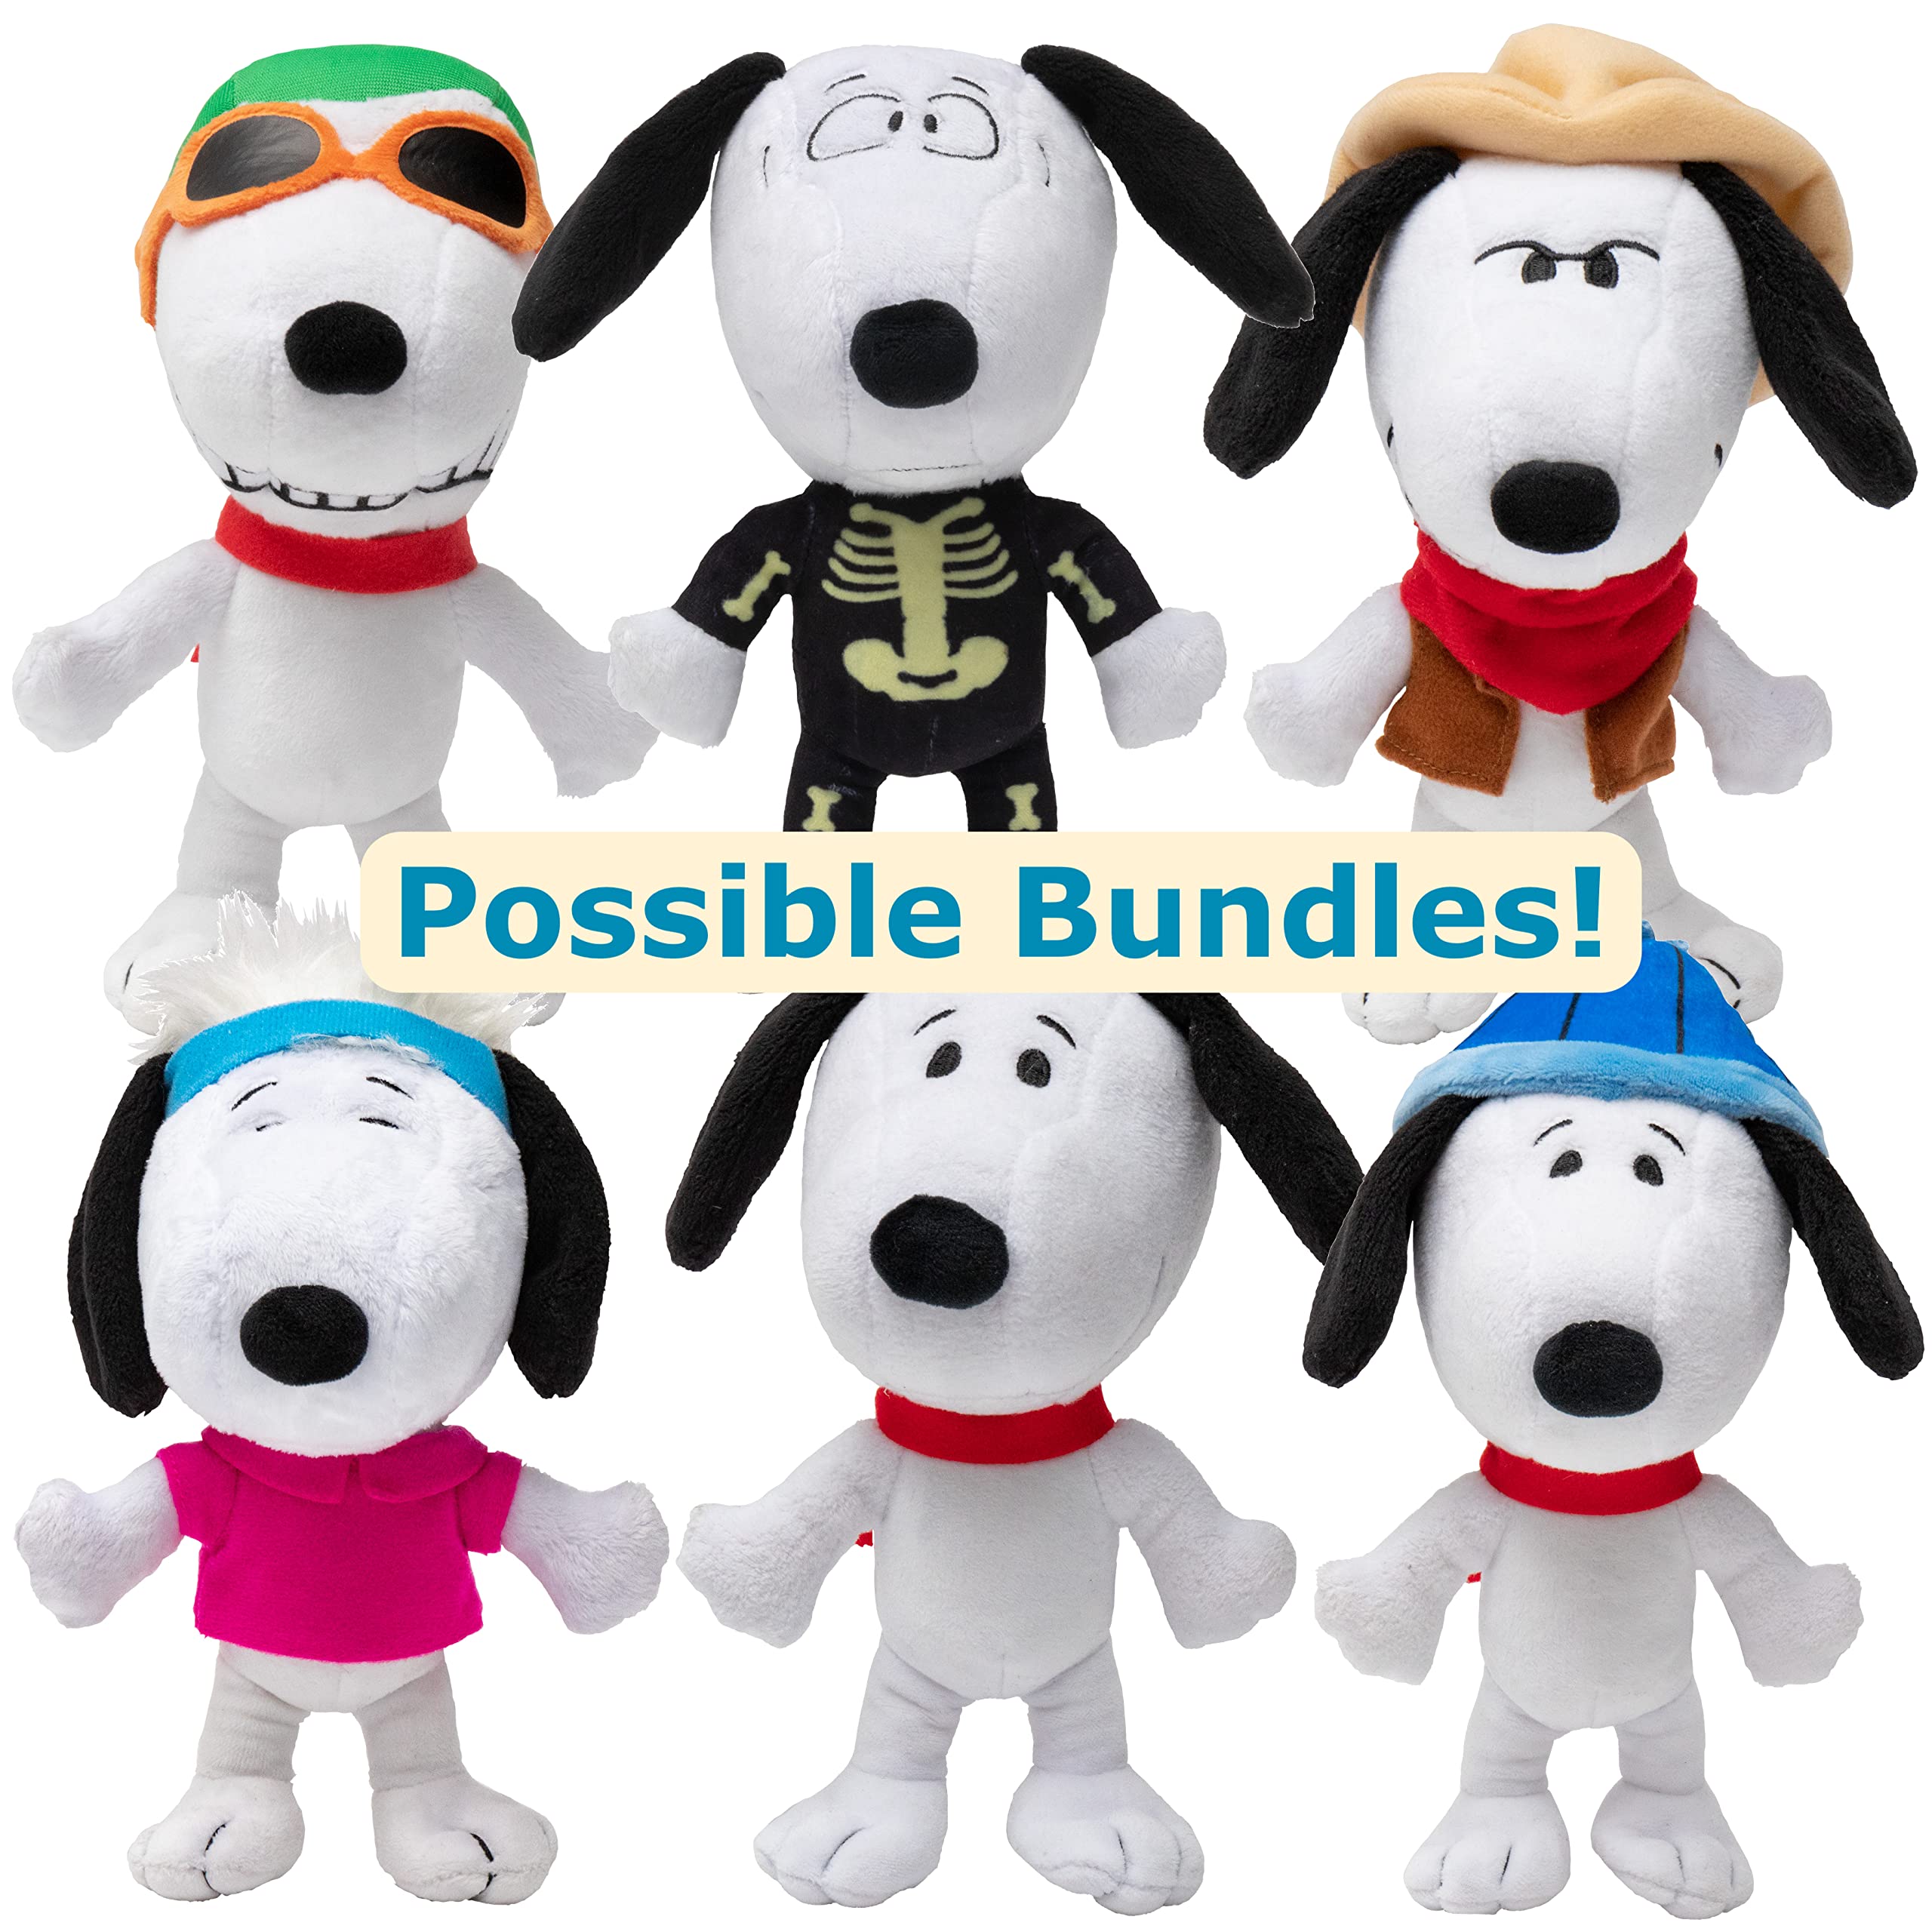 JINX Official Peanuts Collectible Plush Snoopy, Excellent Plushie Toy for Toddlers & Preschool, X-Ray Skeleton